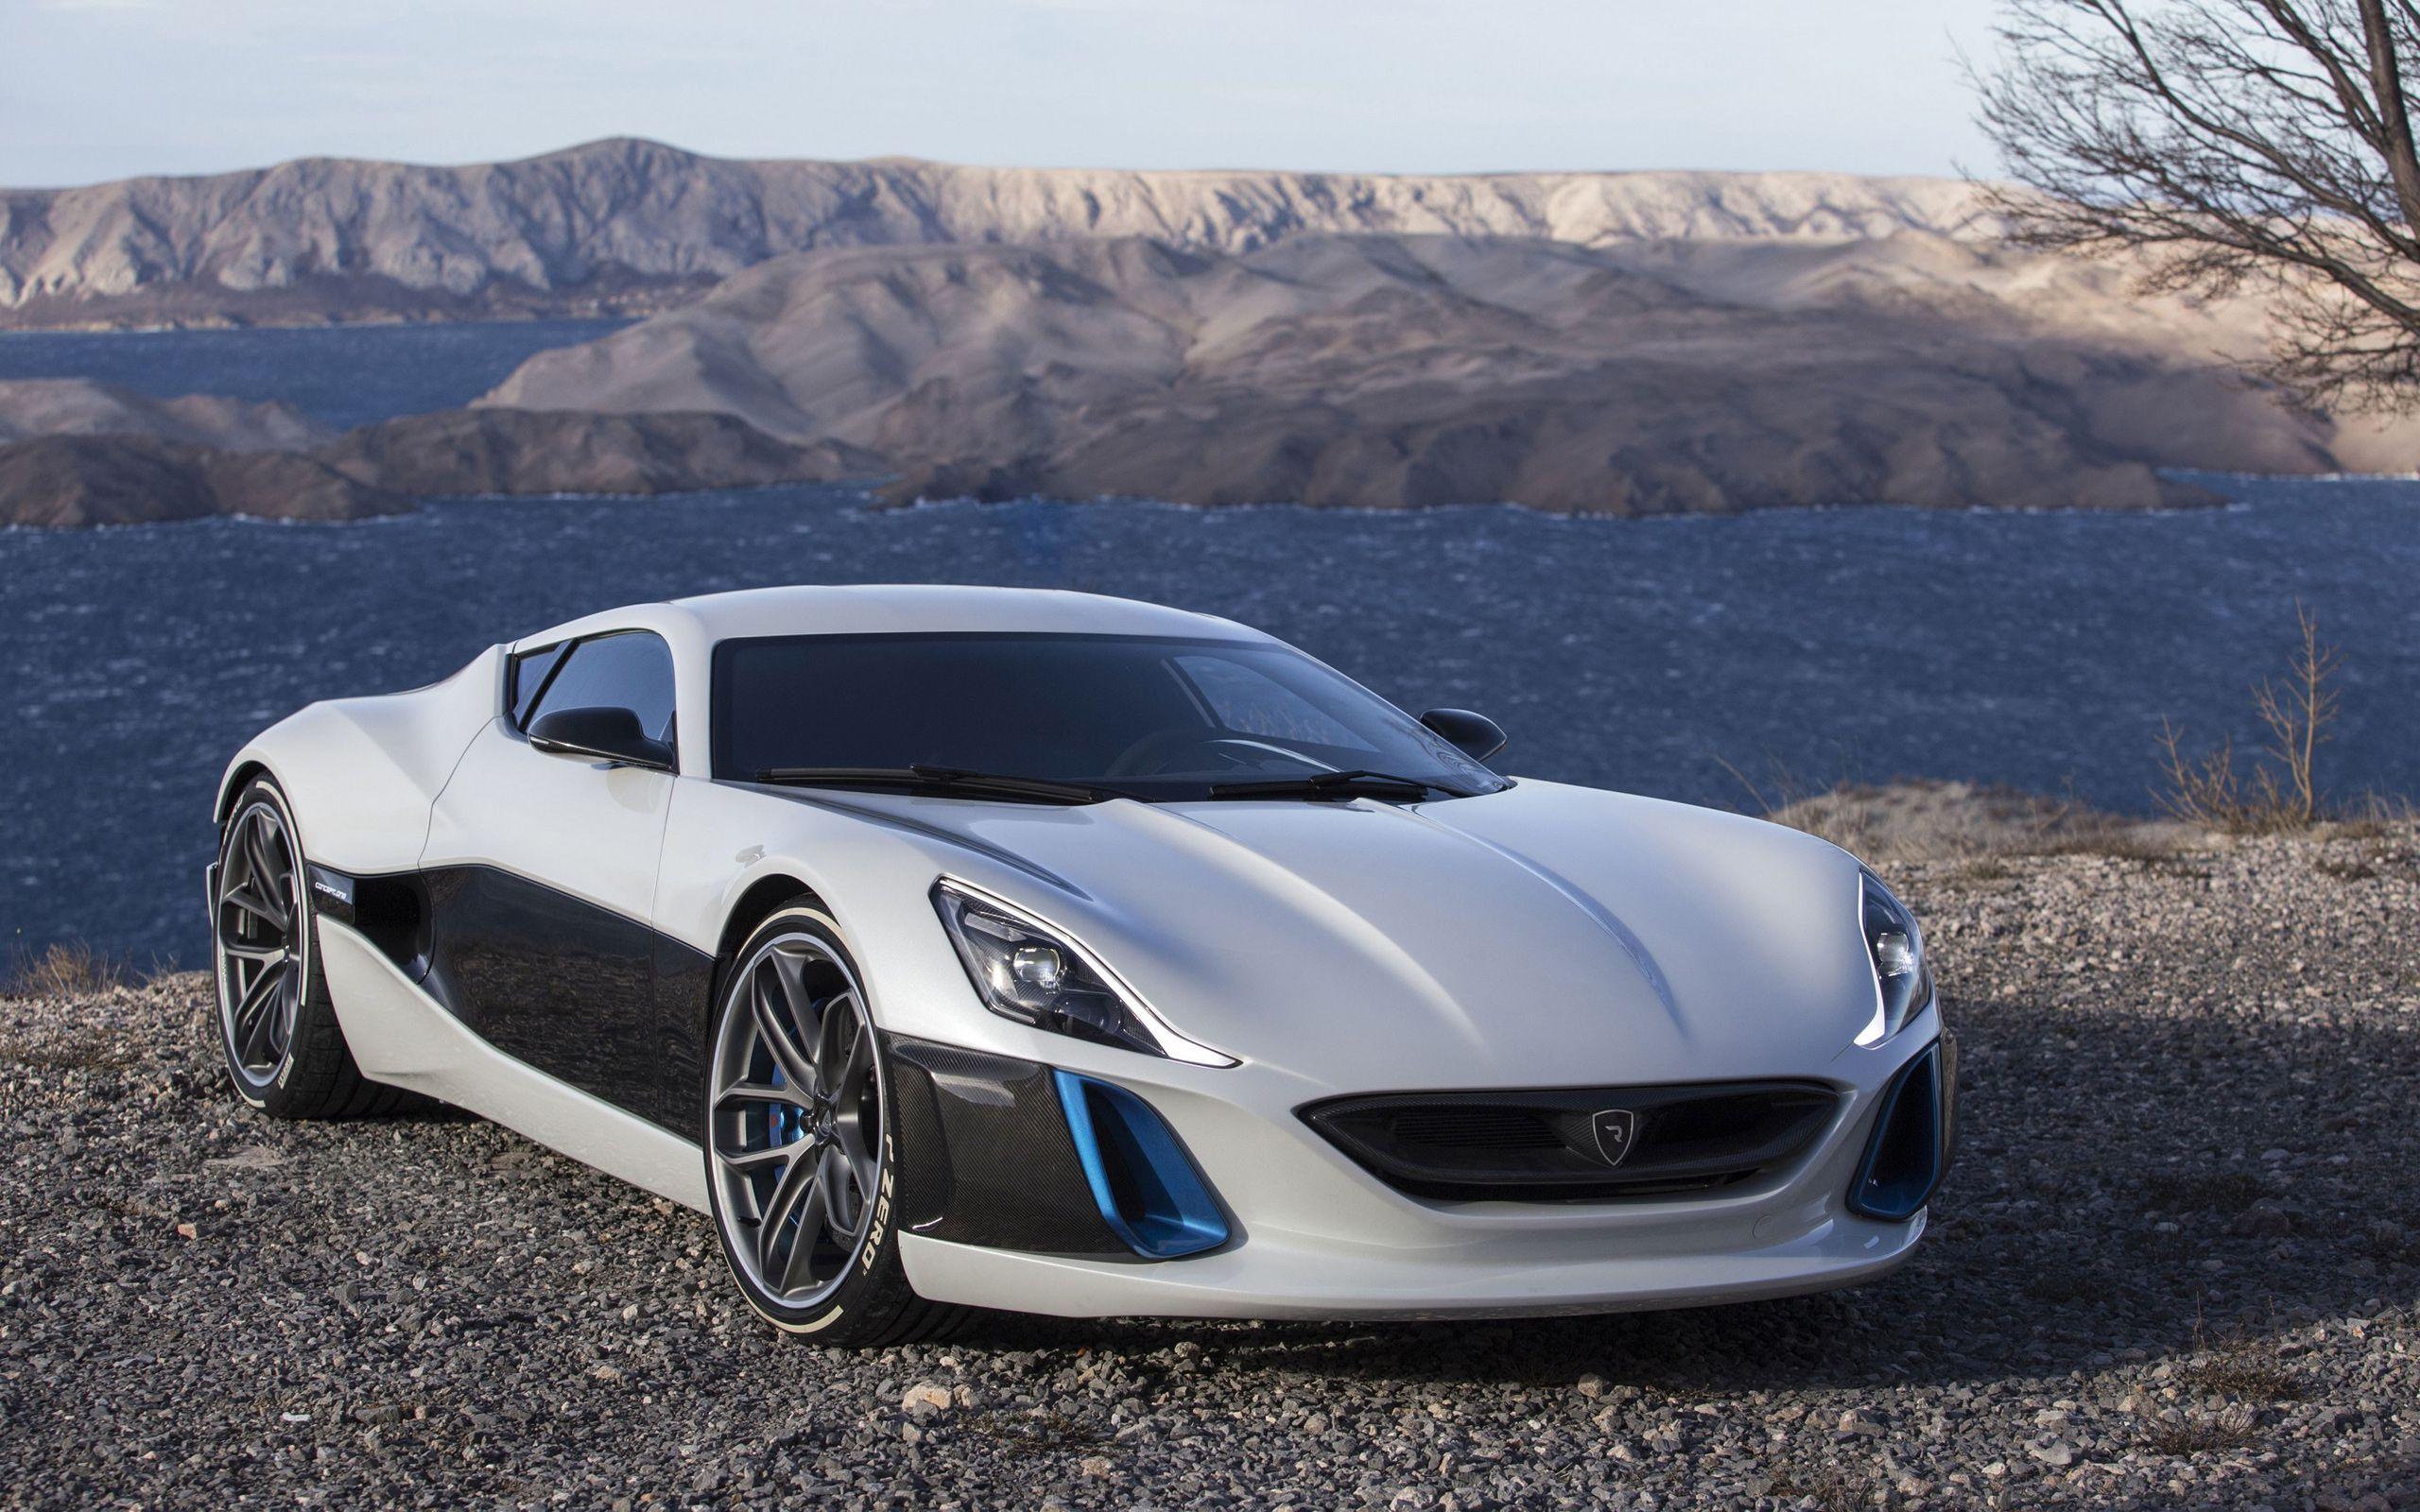 2022 Rimac Nevera First Drive Review: The New Hypercar Benchmark - CNET